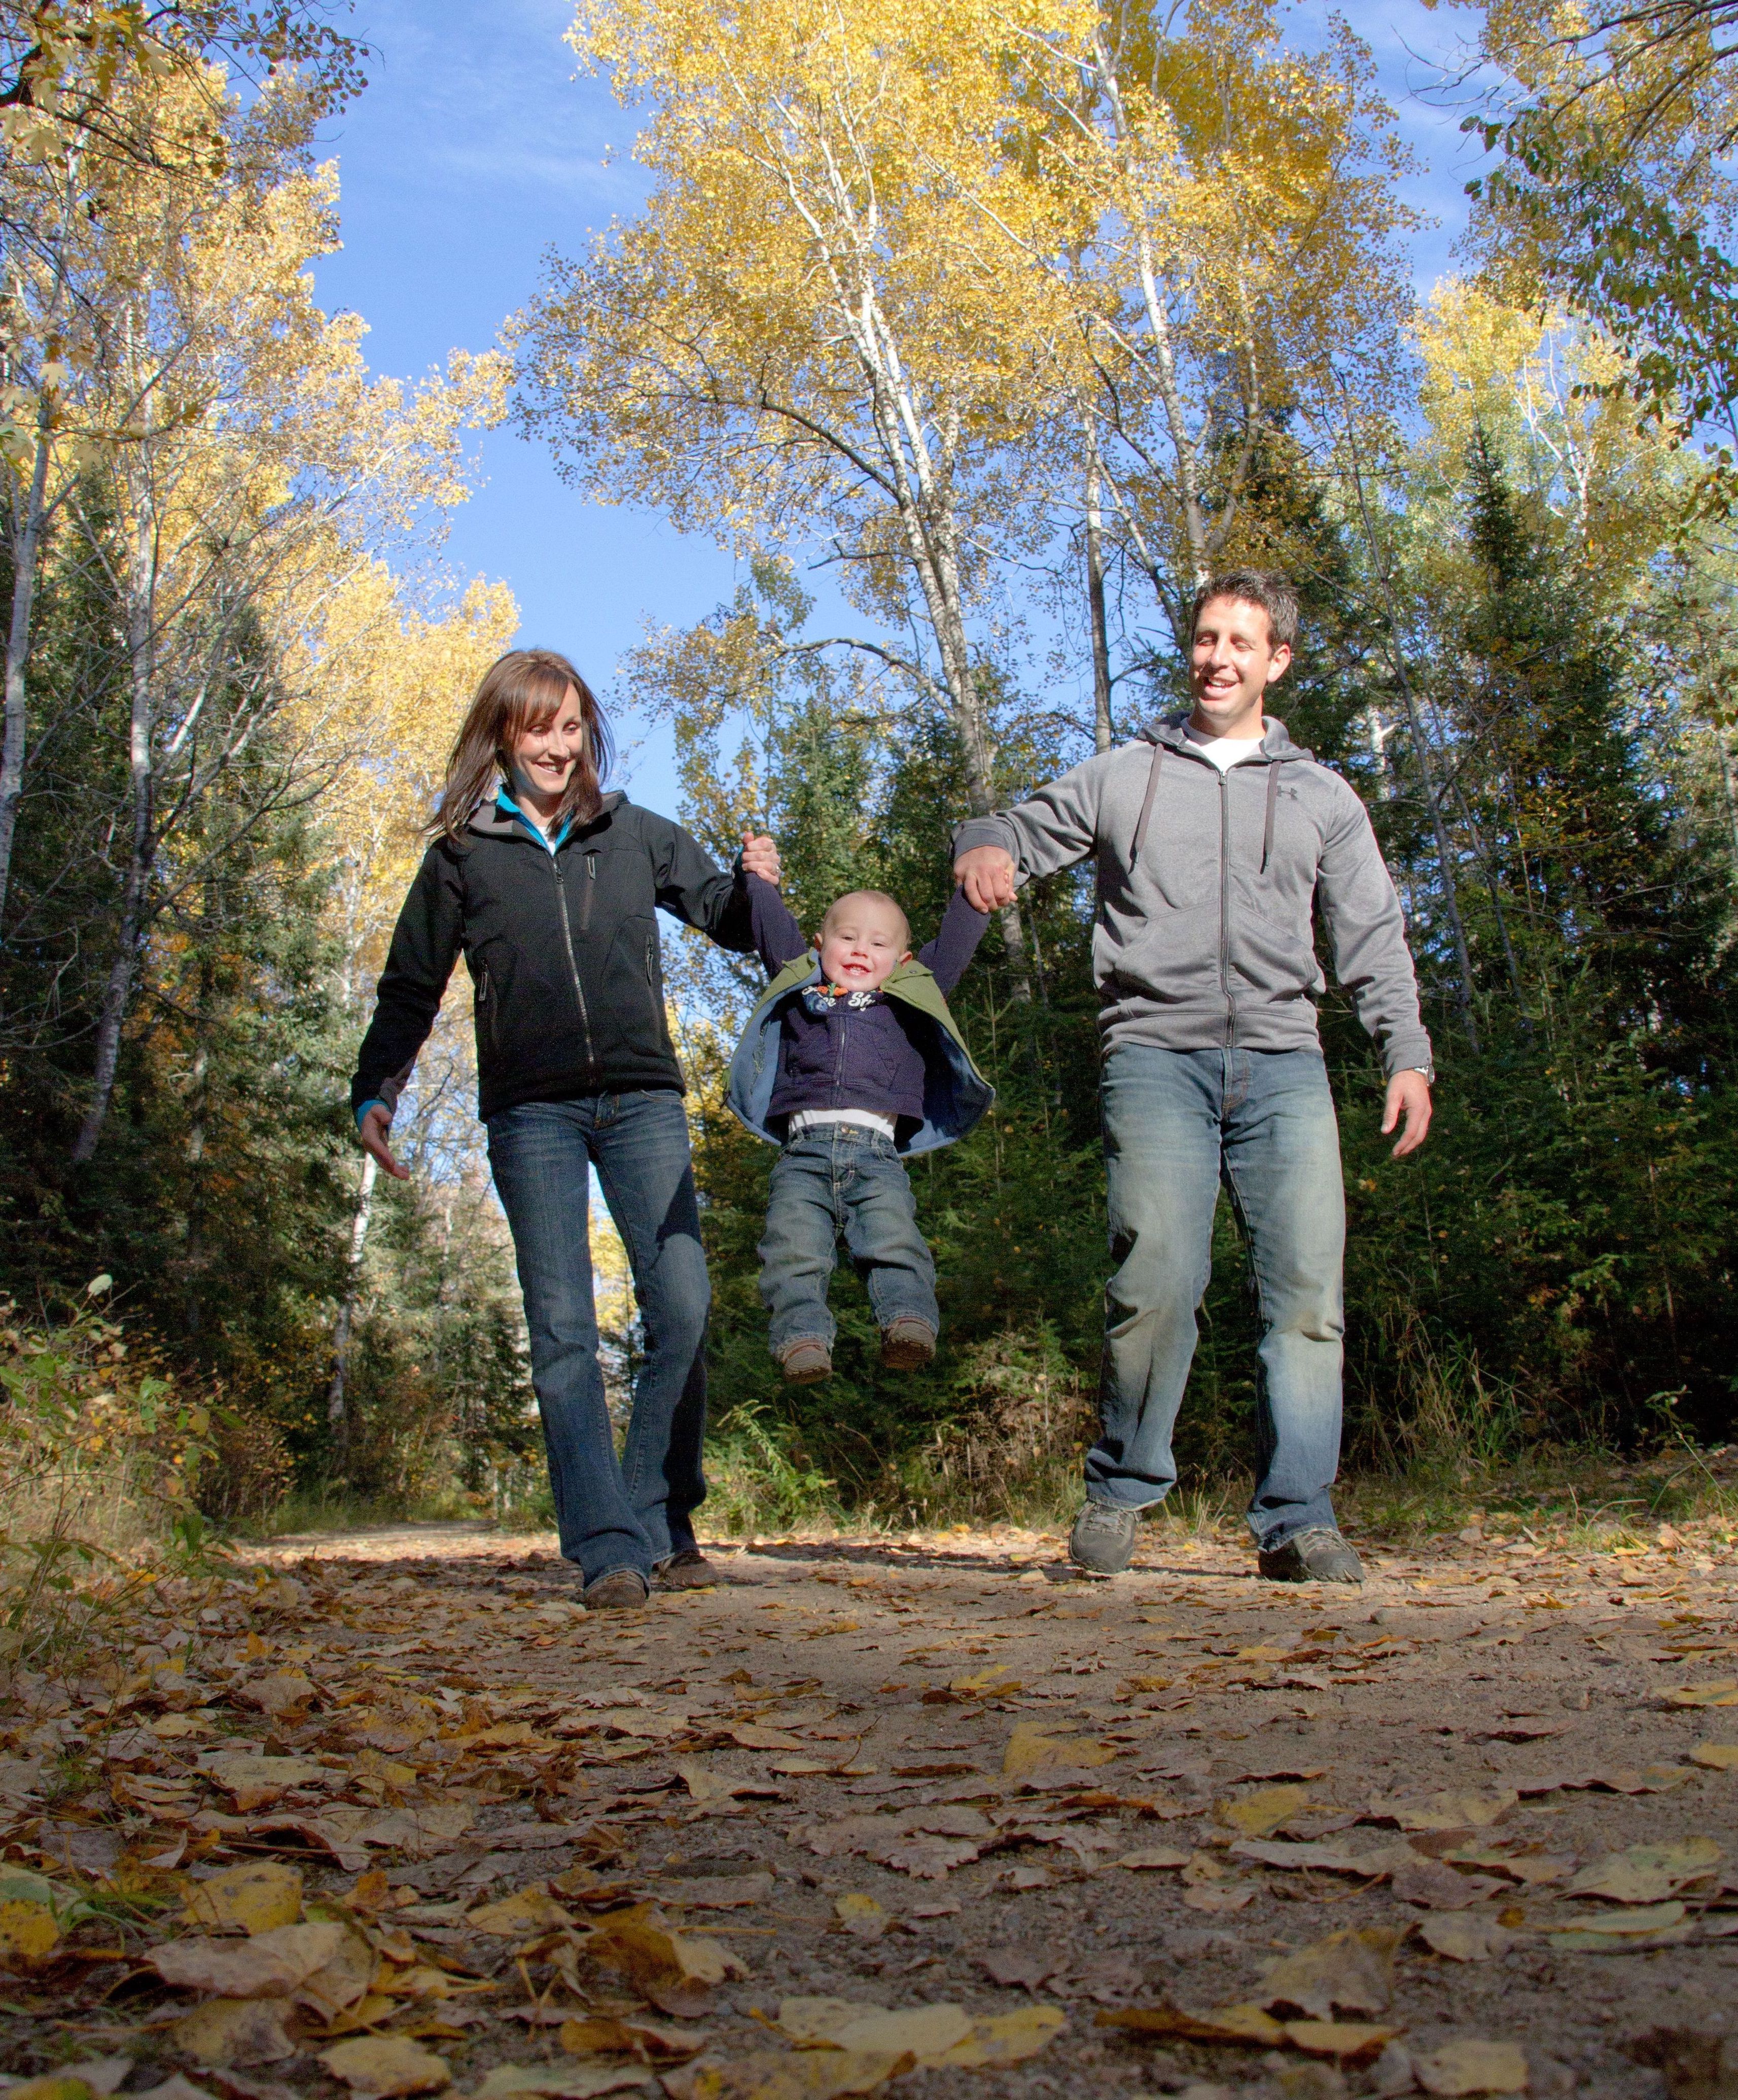 a mother and father each hold the hand of a toddler, smiling as they swing the laughing child off the ground by the hands as they walk on a forest trail. The forest leaves are yellow, green and orange and the sky is bright blue.